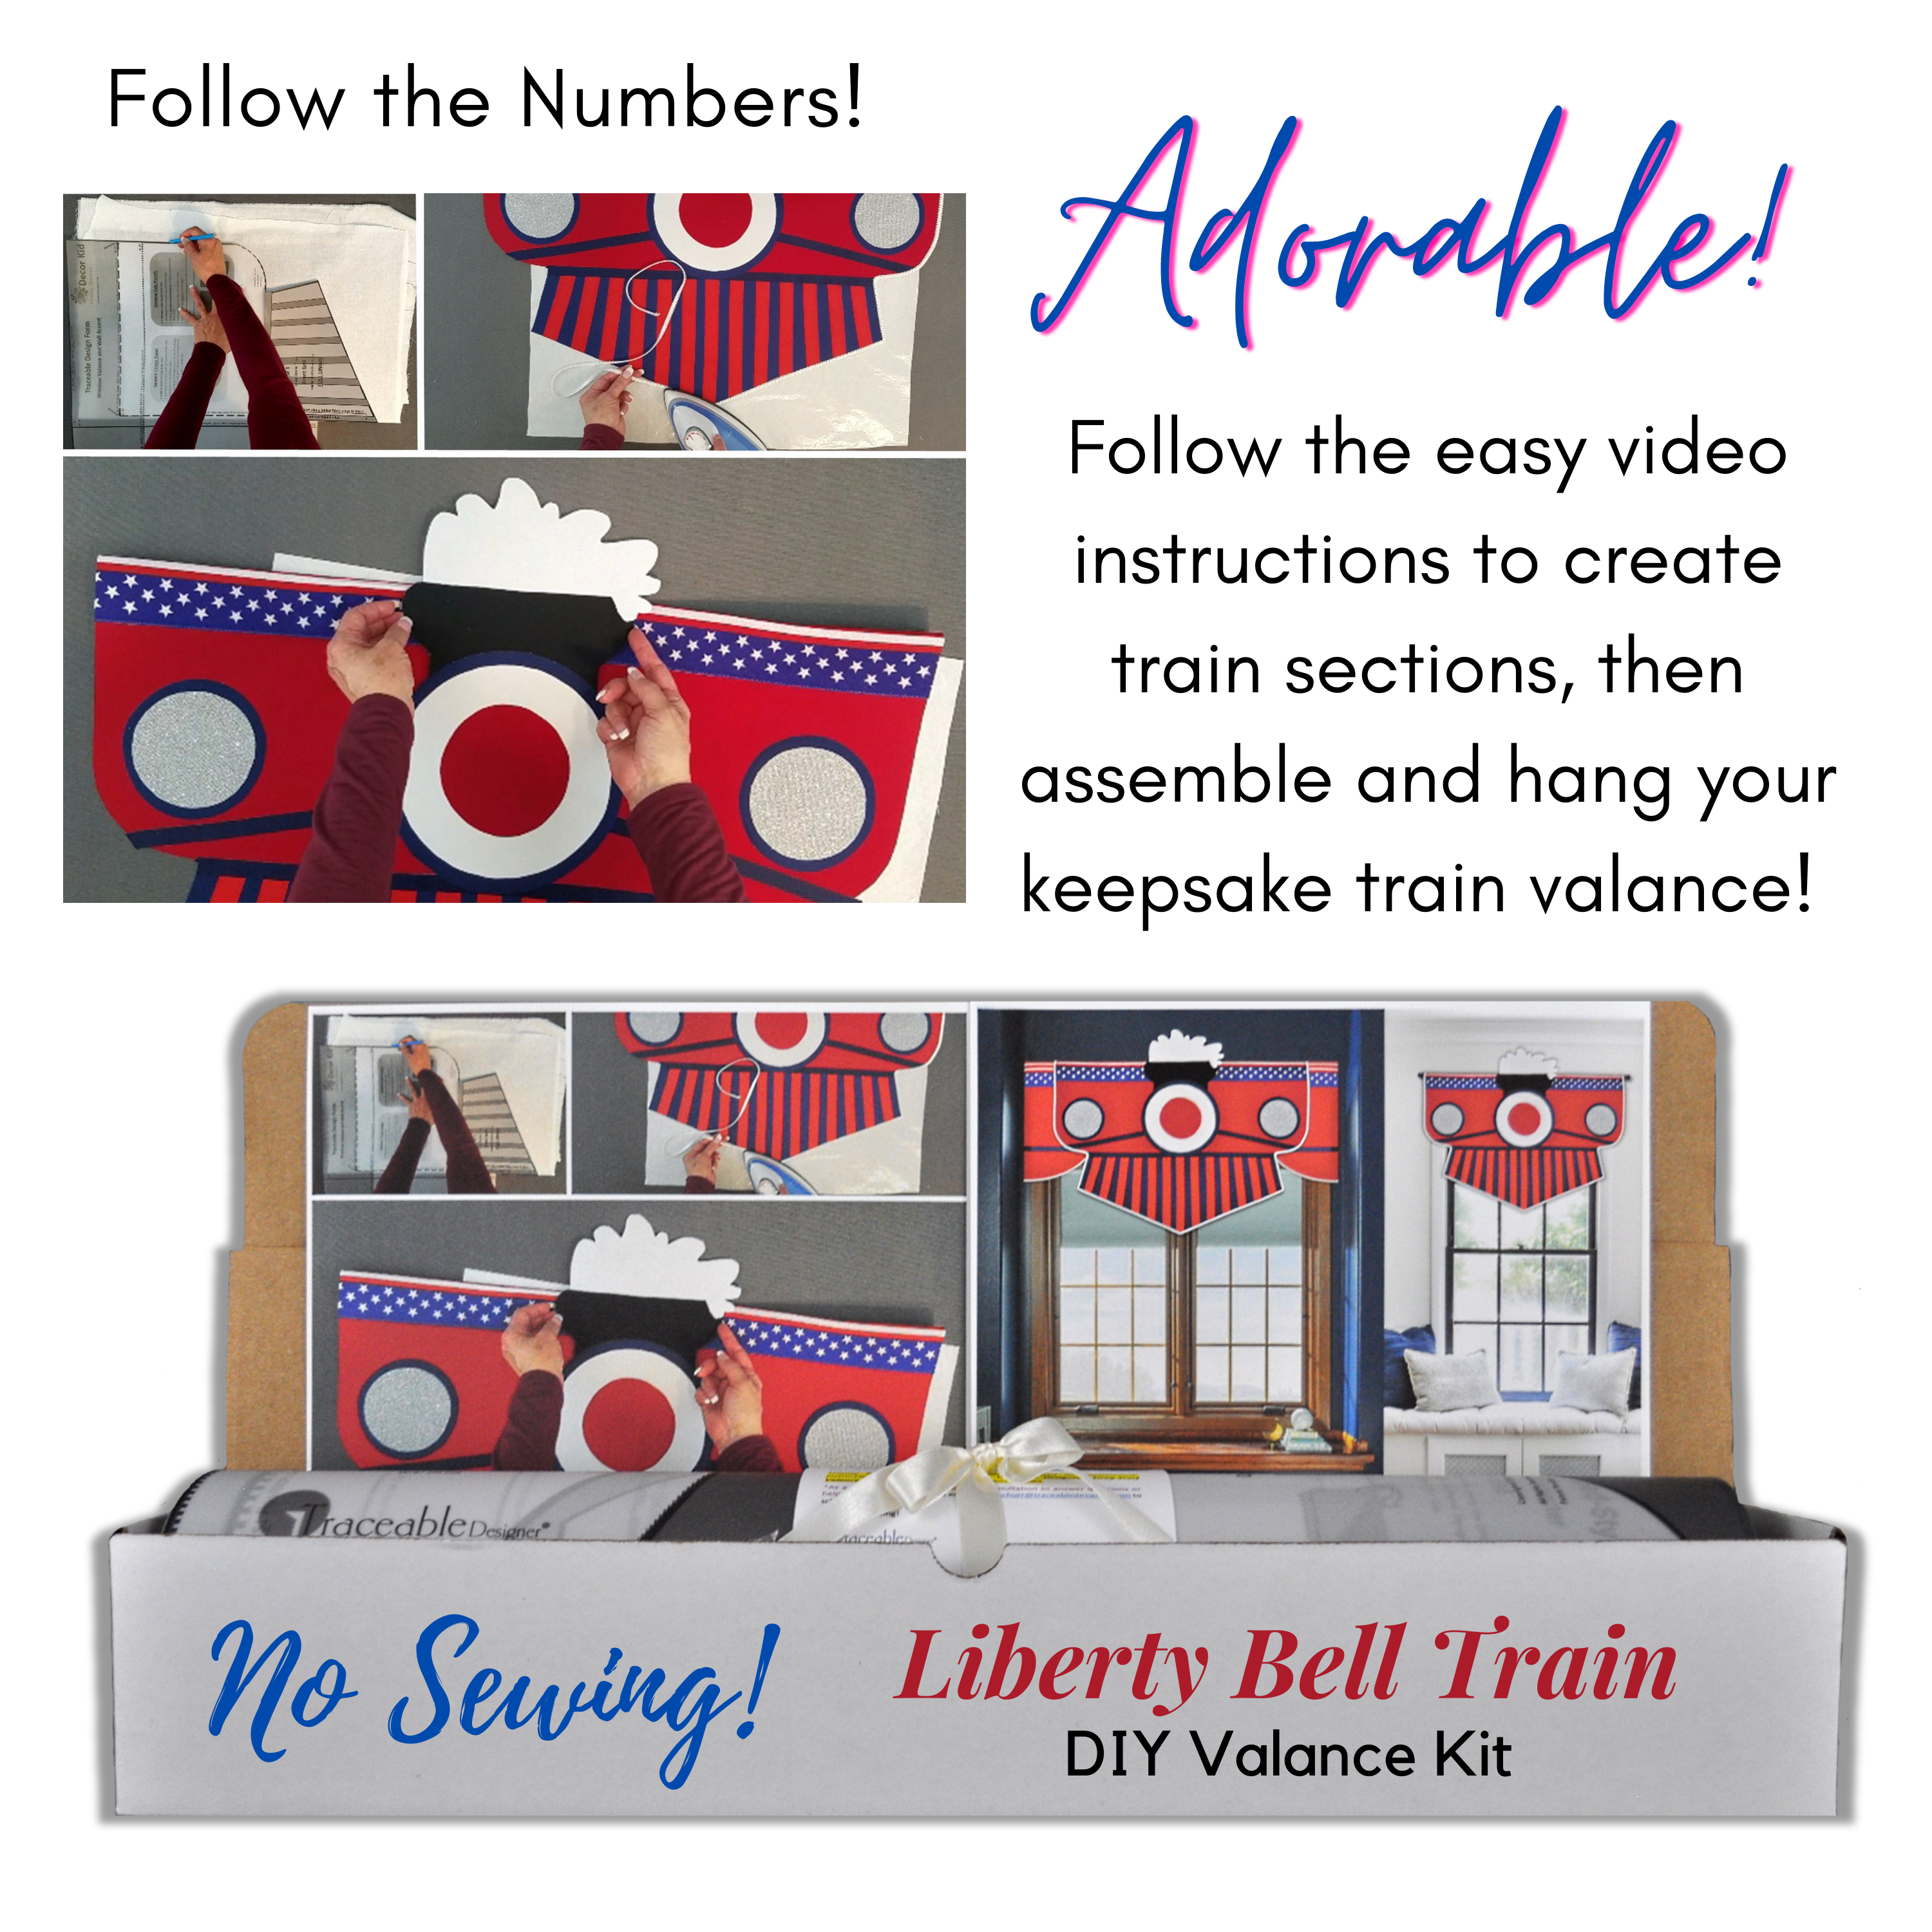 Children's patriotic red, white, and blue fabric train craft kit. Fit window sizes up to 54" wide. No sewing needed!